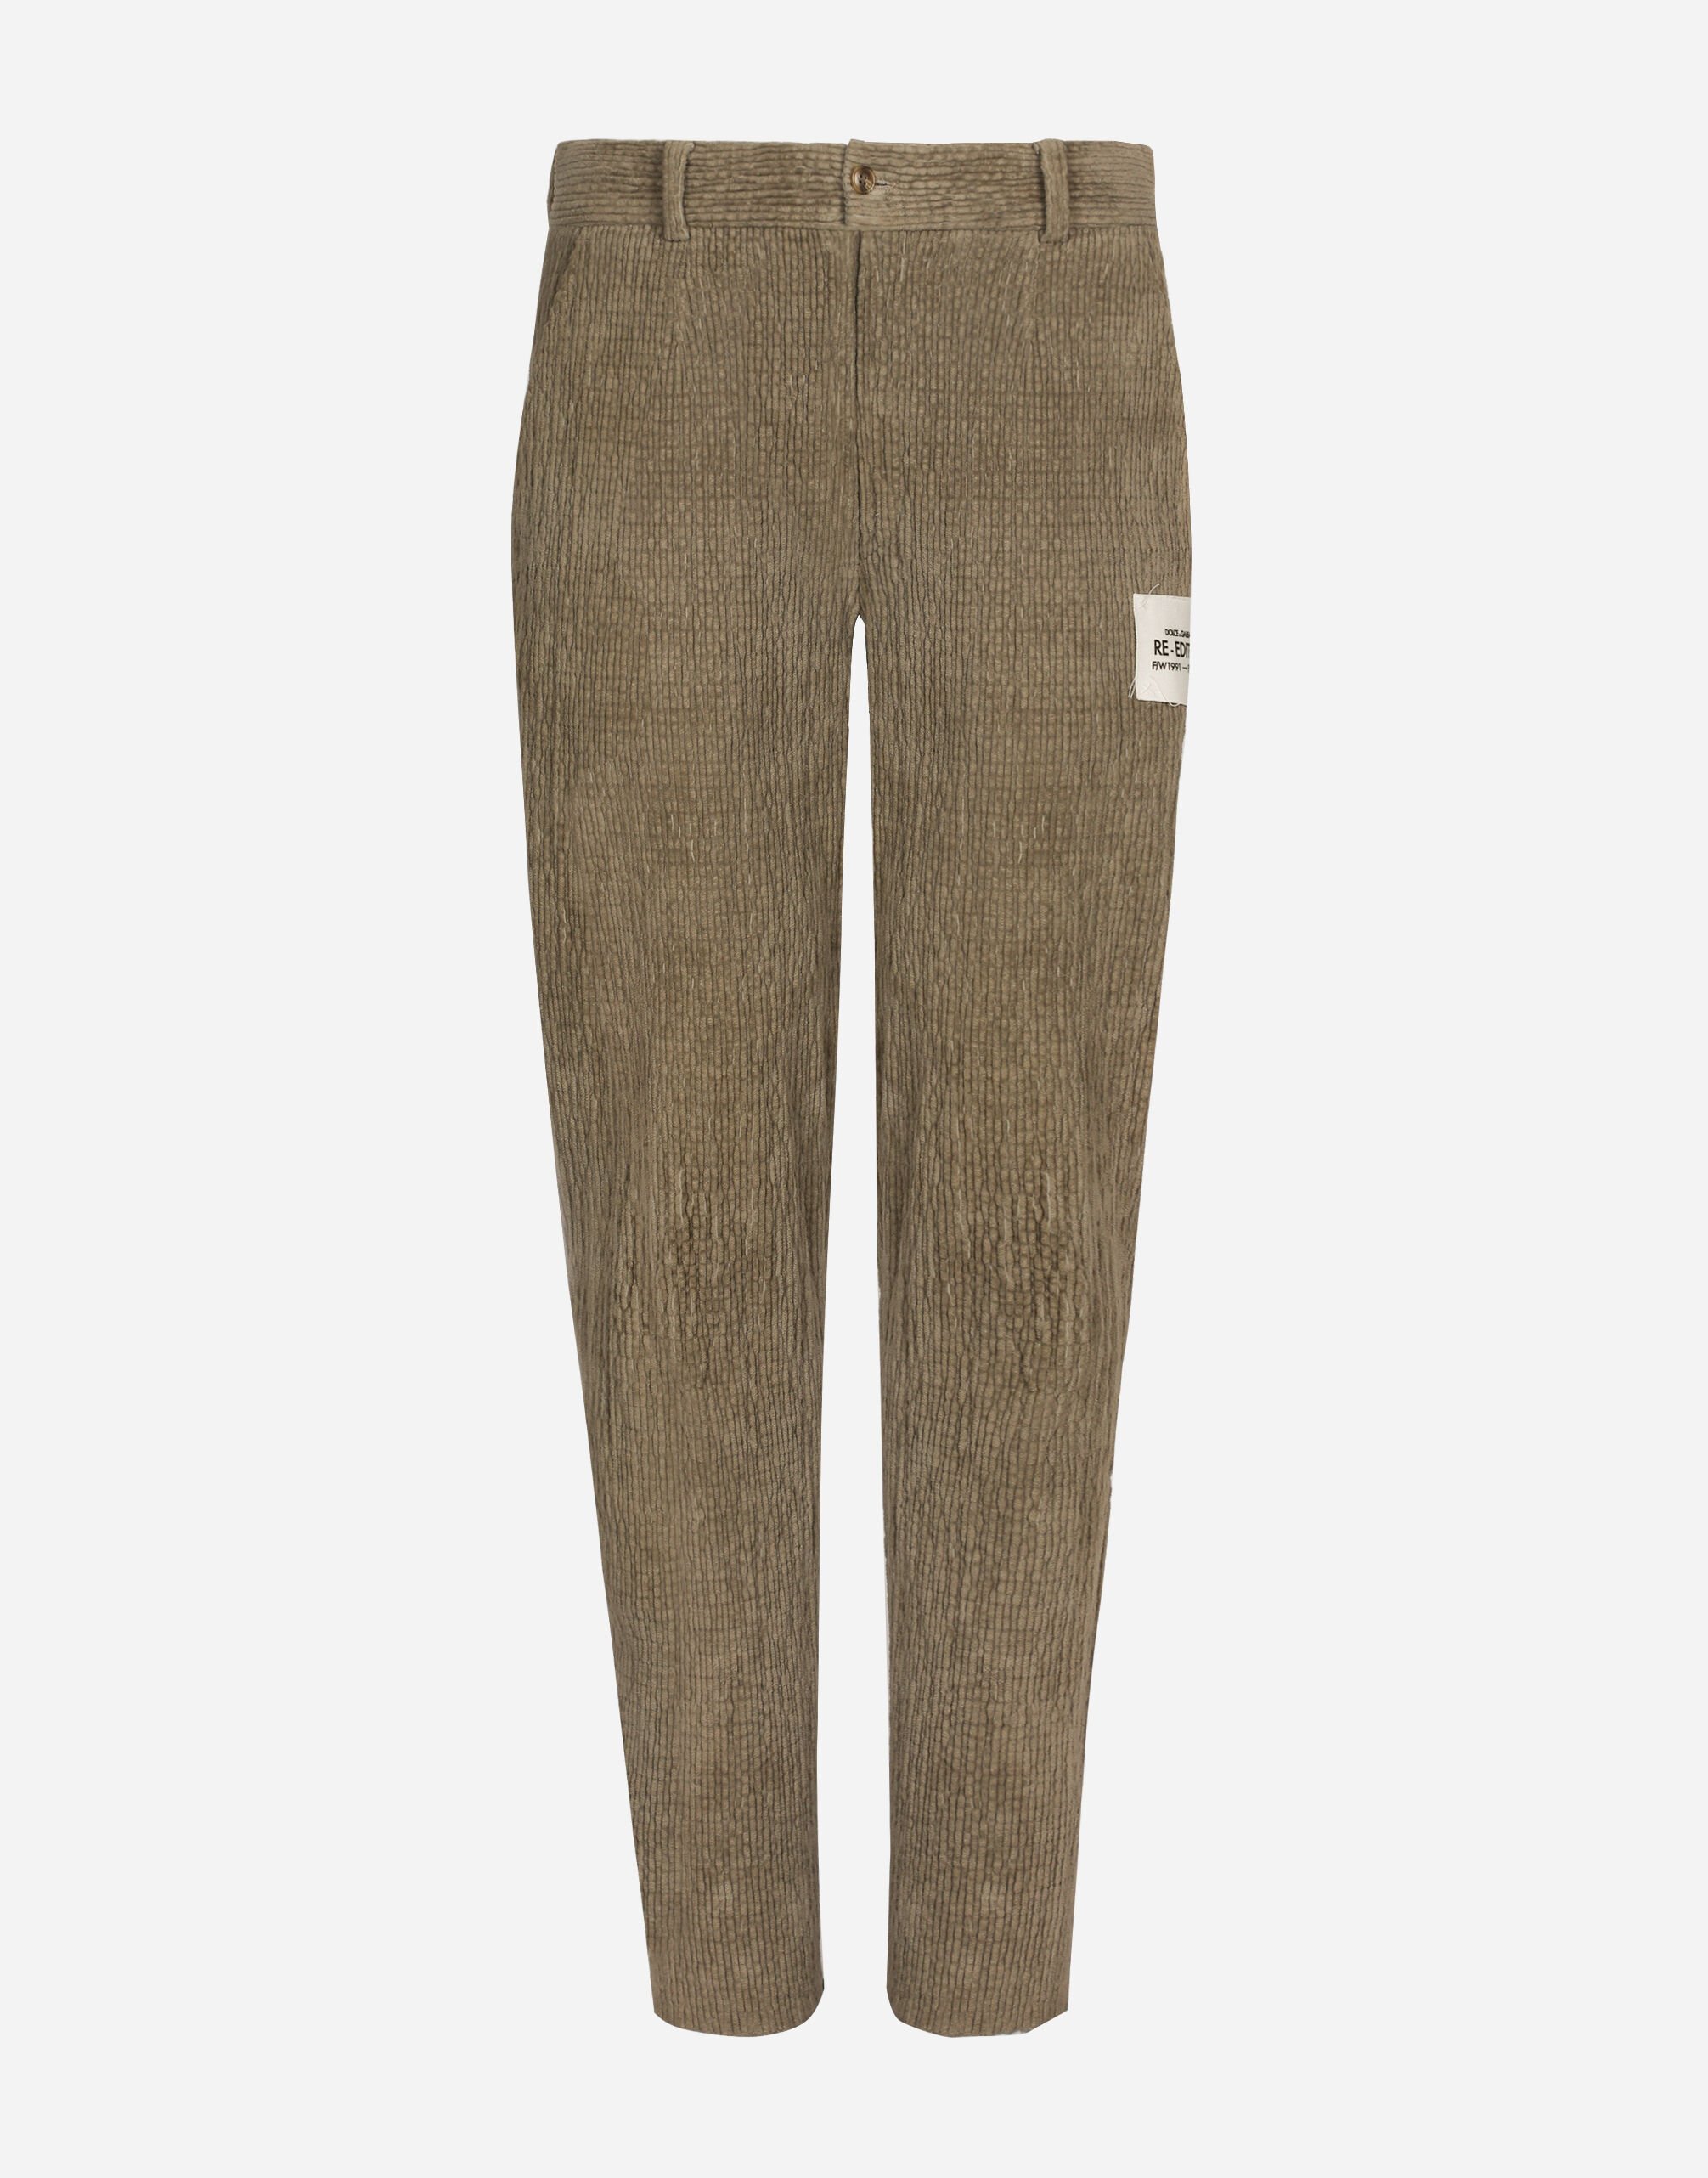 Dolce & Gabbana Corduroy pants with Re-Edition label White CS2079AO666